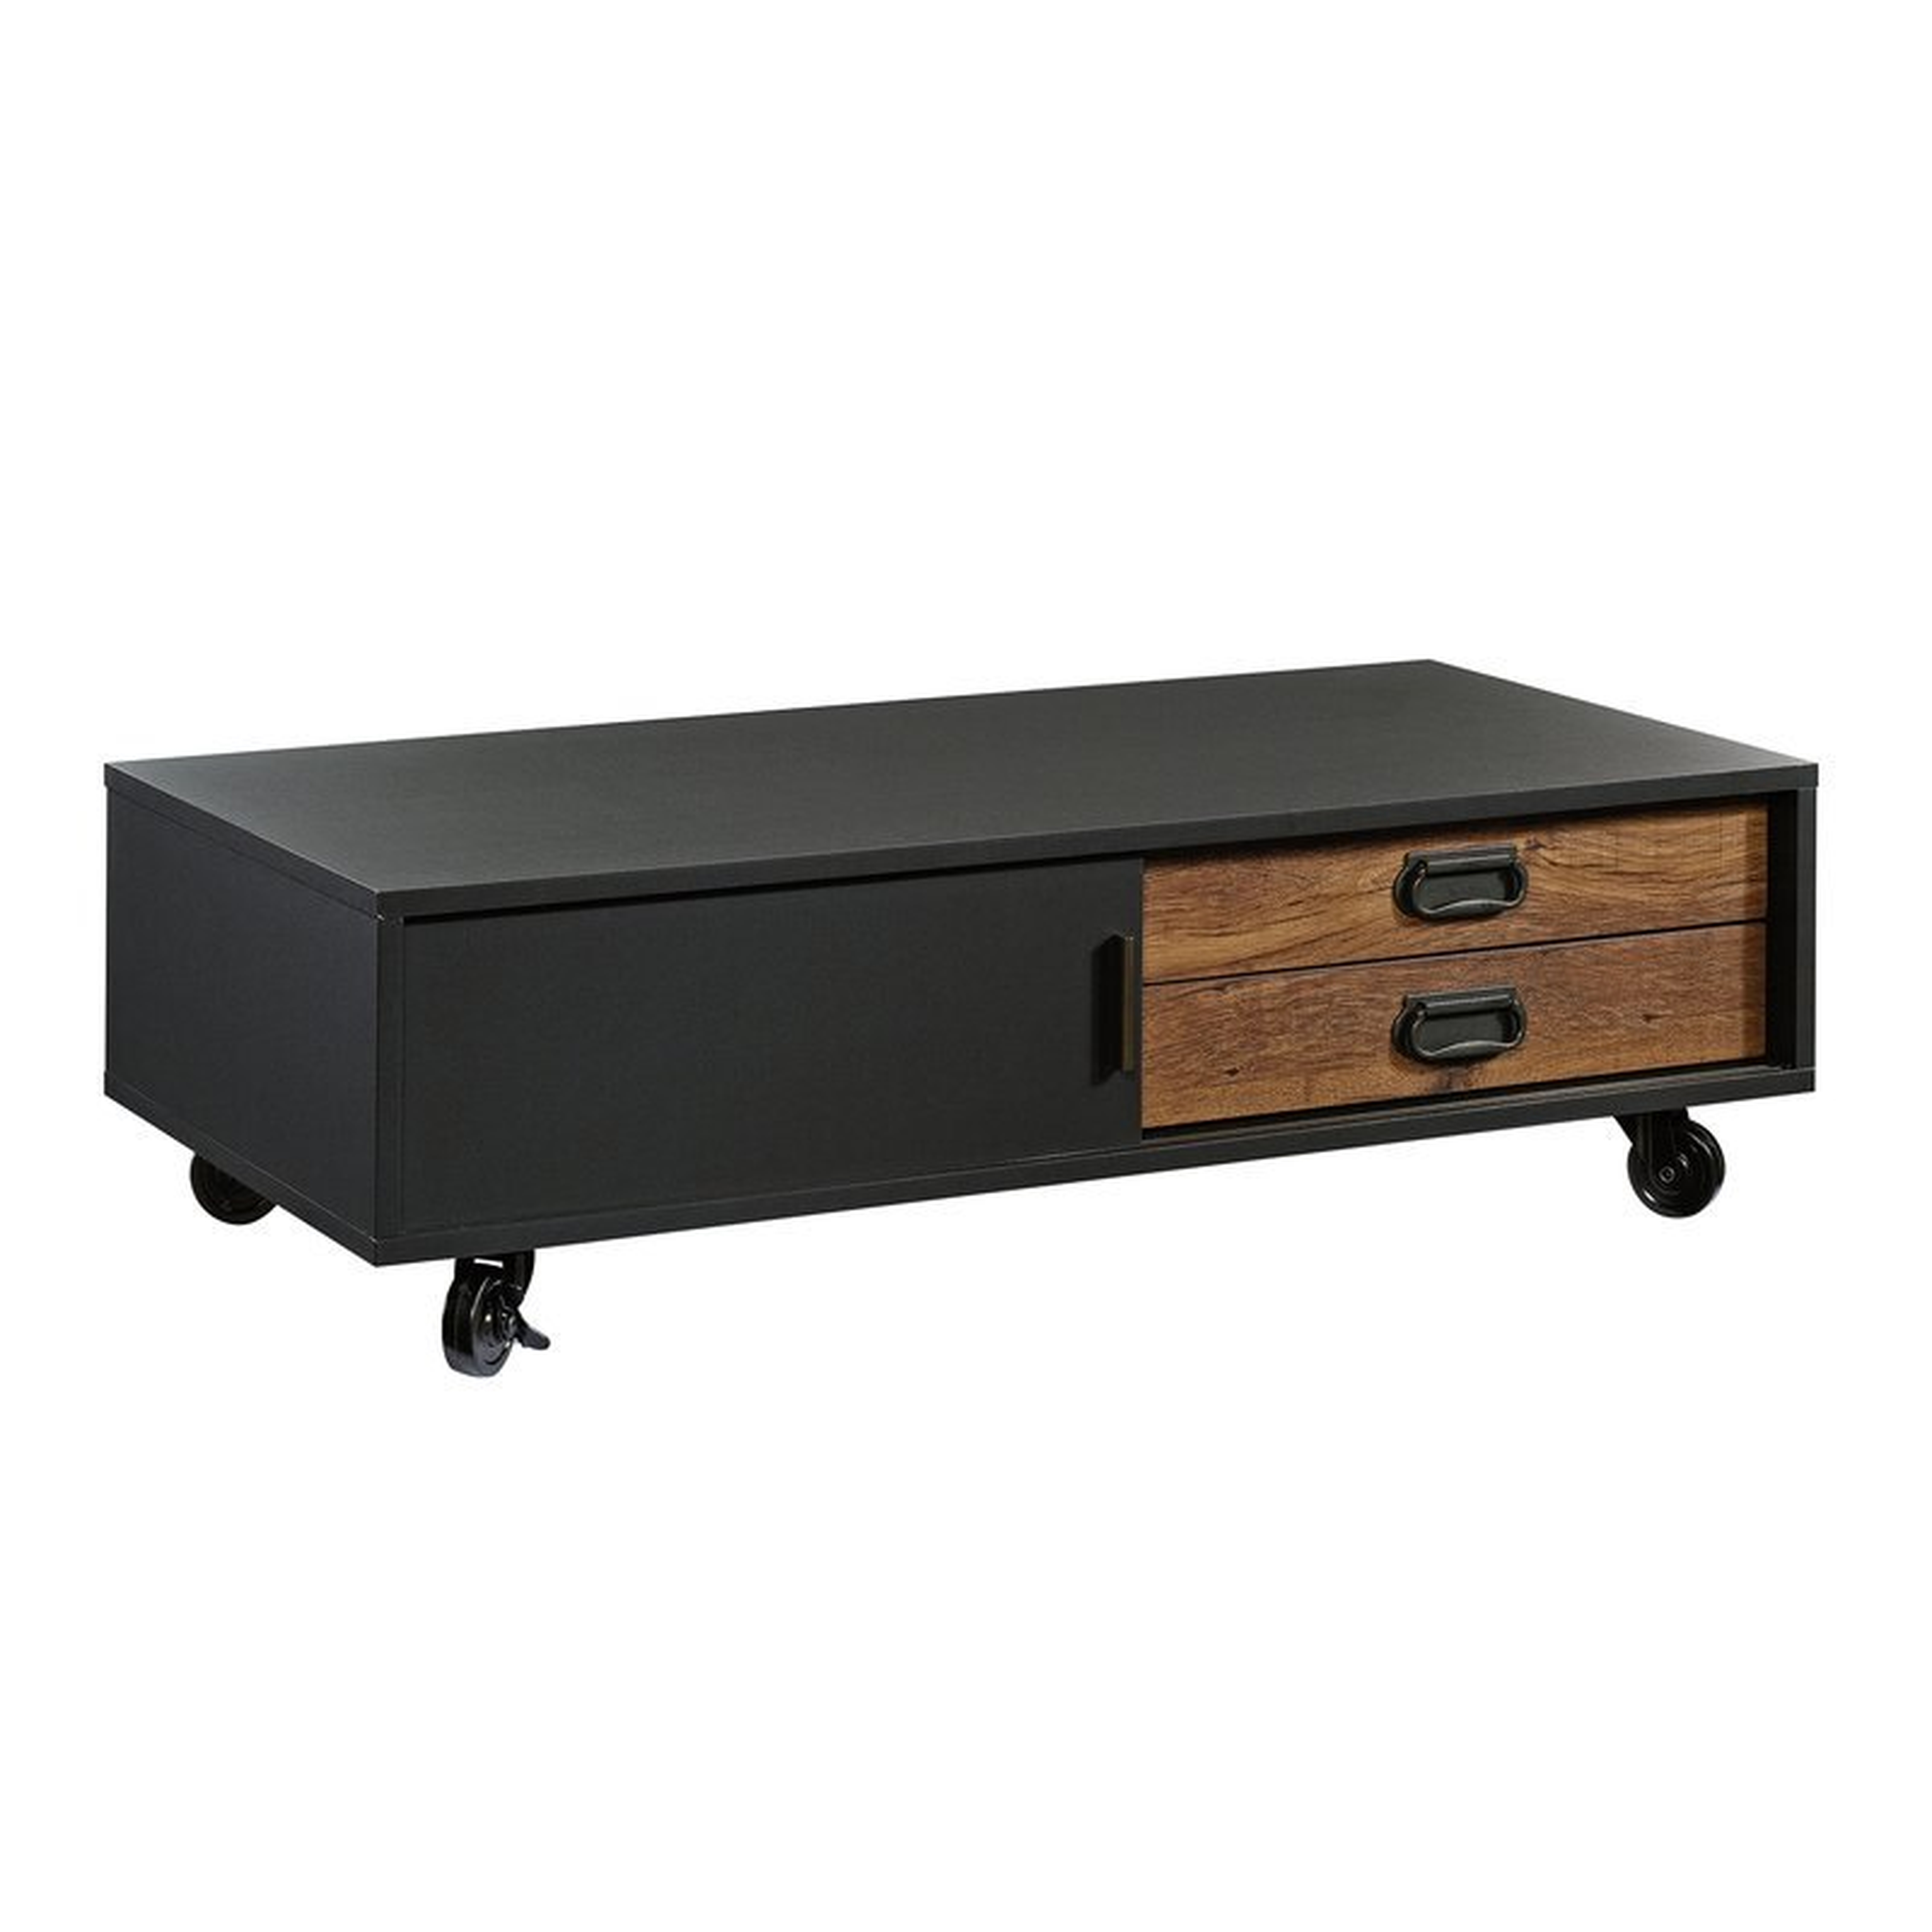 Loehr Coffee Table with Storage - AllModern